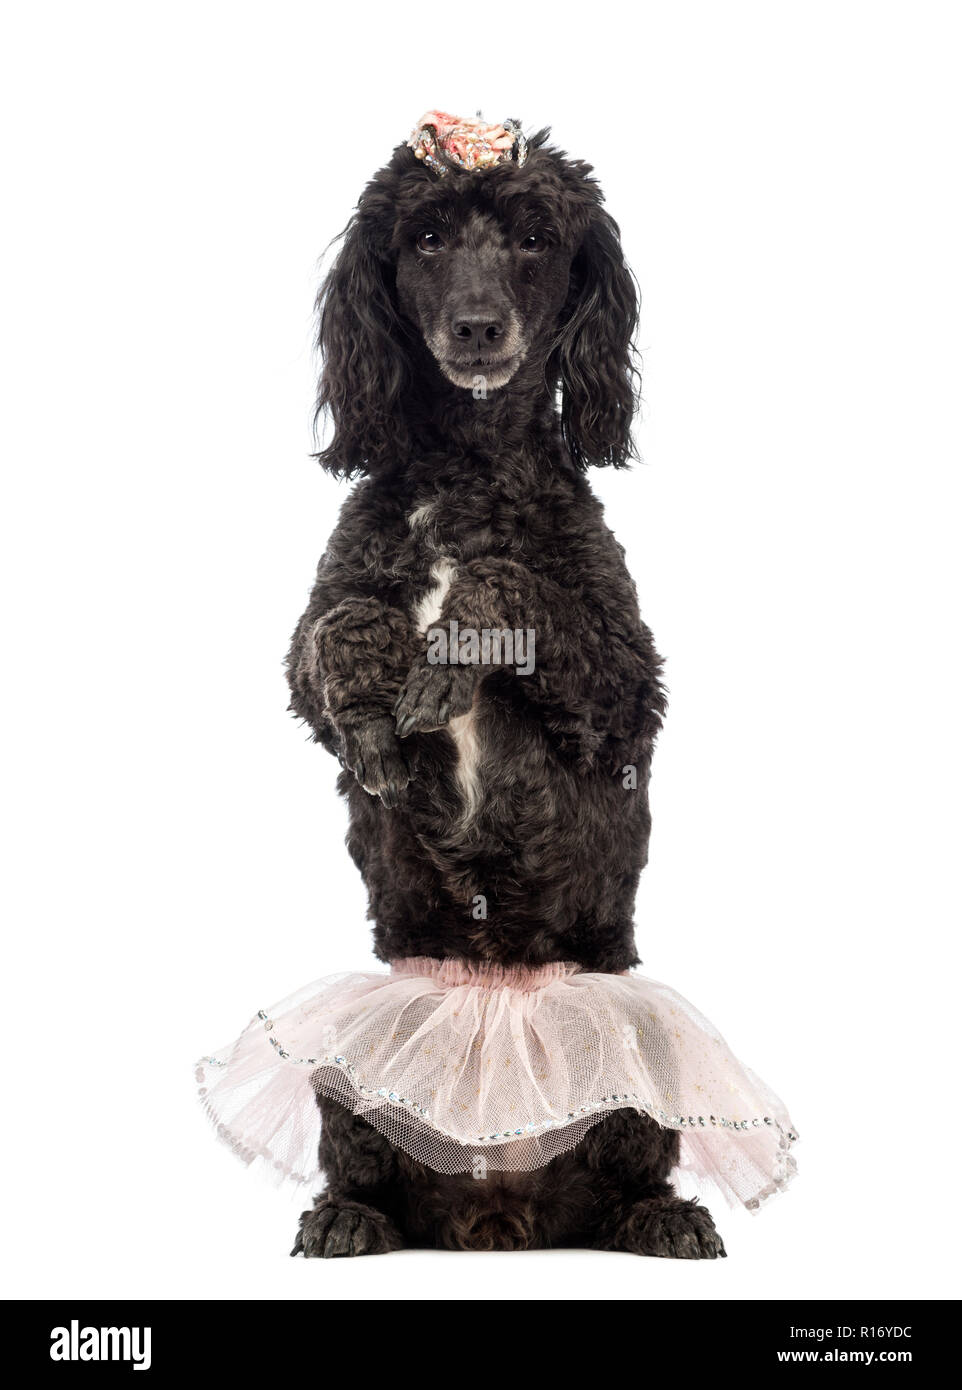 Poodle, 5 years old, standing on hind legs, wearing a pink tutu and looking at the camera in front of white background Stock Photo